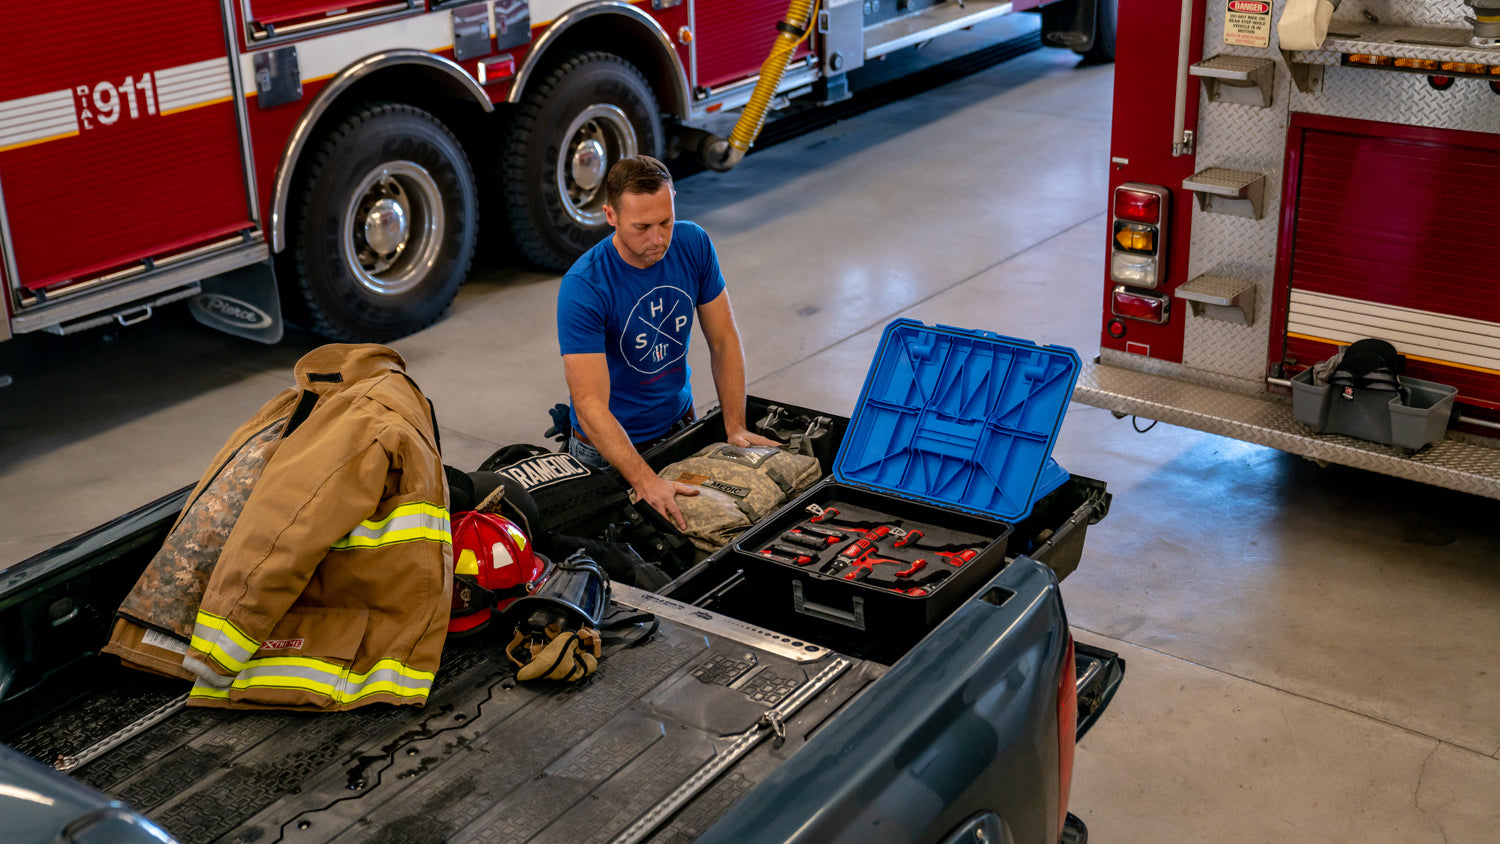 DECKED Drawer Storage System: Firefighter and Public Service